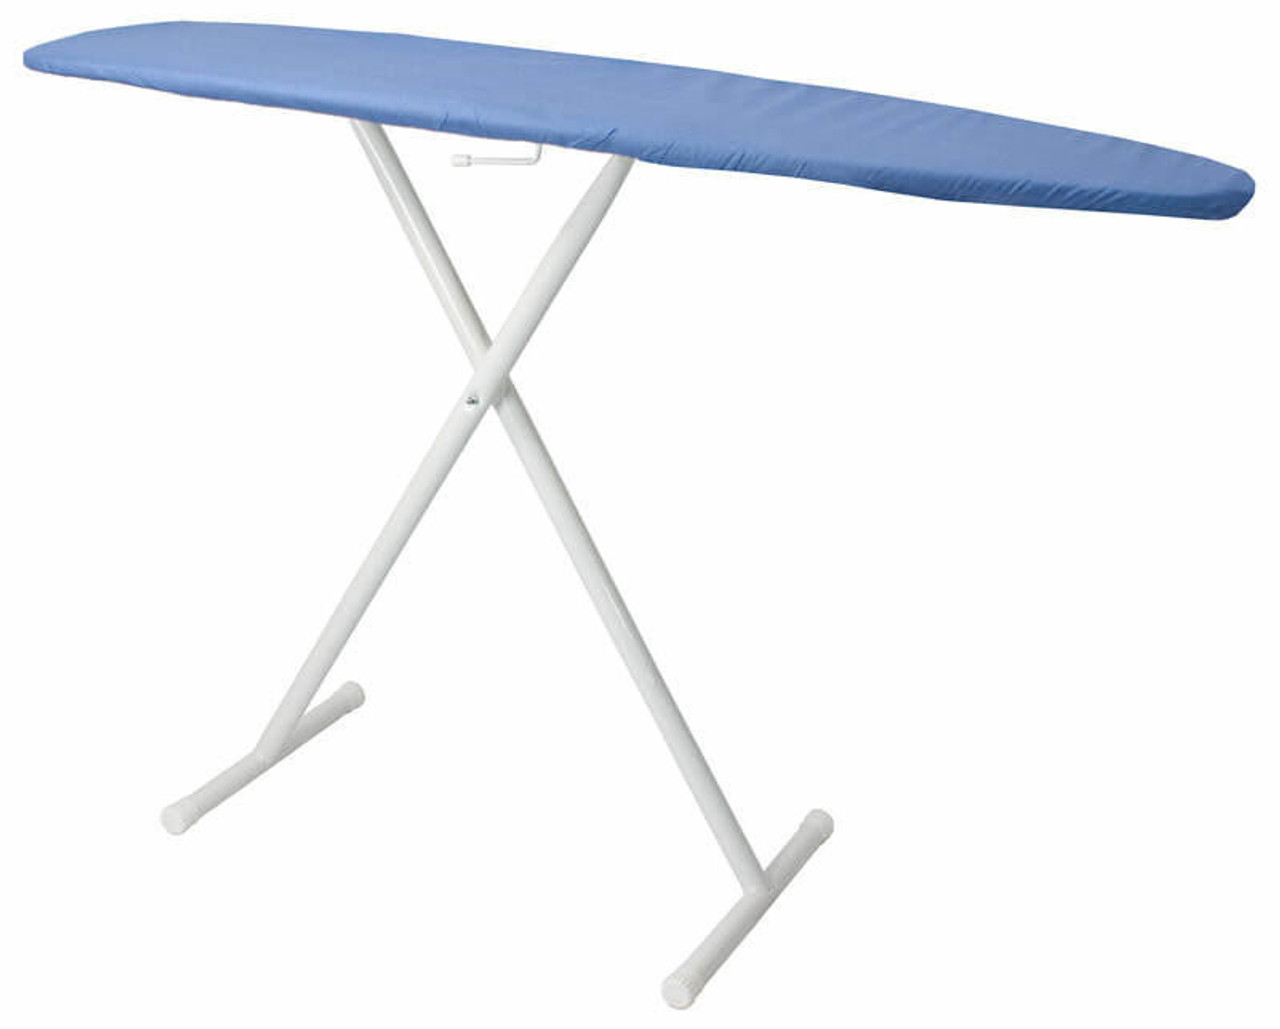 HOSPITALITY 1 SOURCE or BASIC IRONING BOARD - ALL COLORS